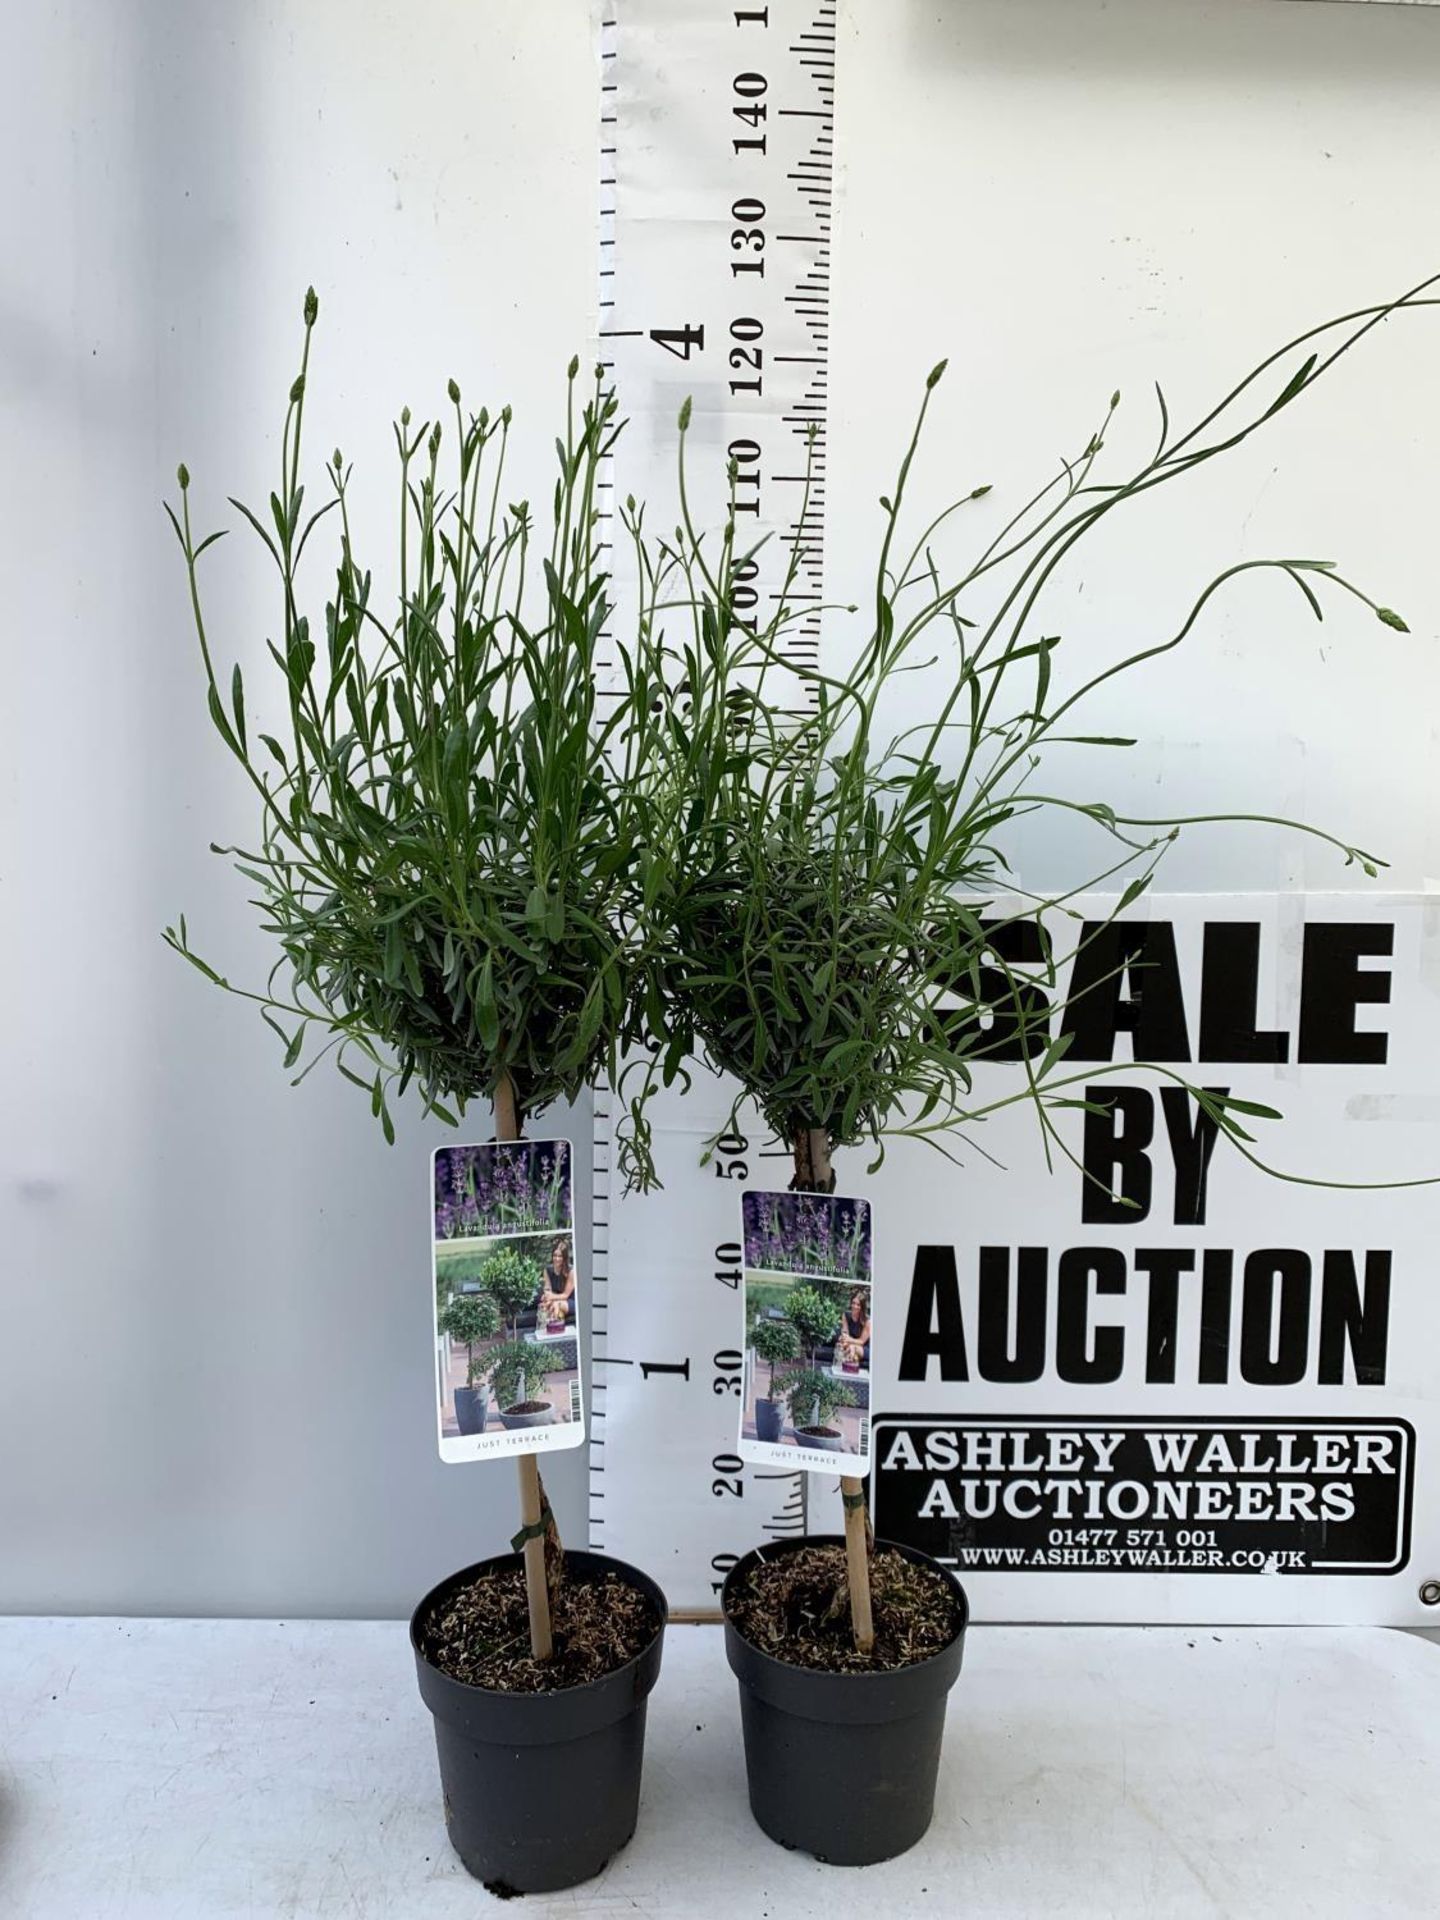 TWO LAVENDER 'AUGUSTFOLIA' STANDARD TREES APPROX 120CM IN HEIGHT IN 3LTR POTS PLUS VAT TO BE SOLD - Image 2 of 10